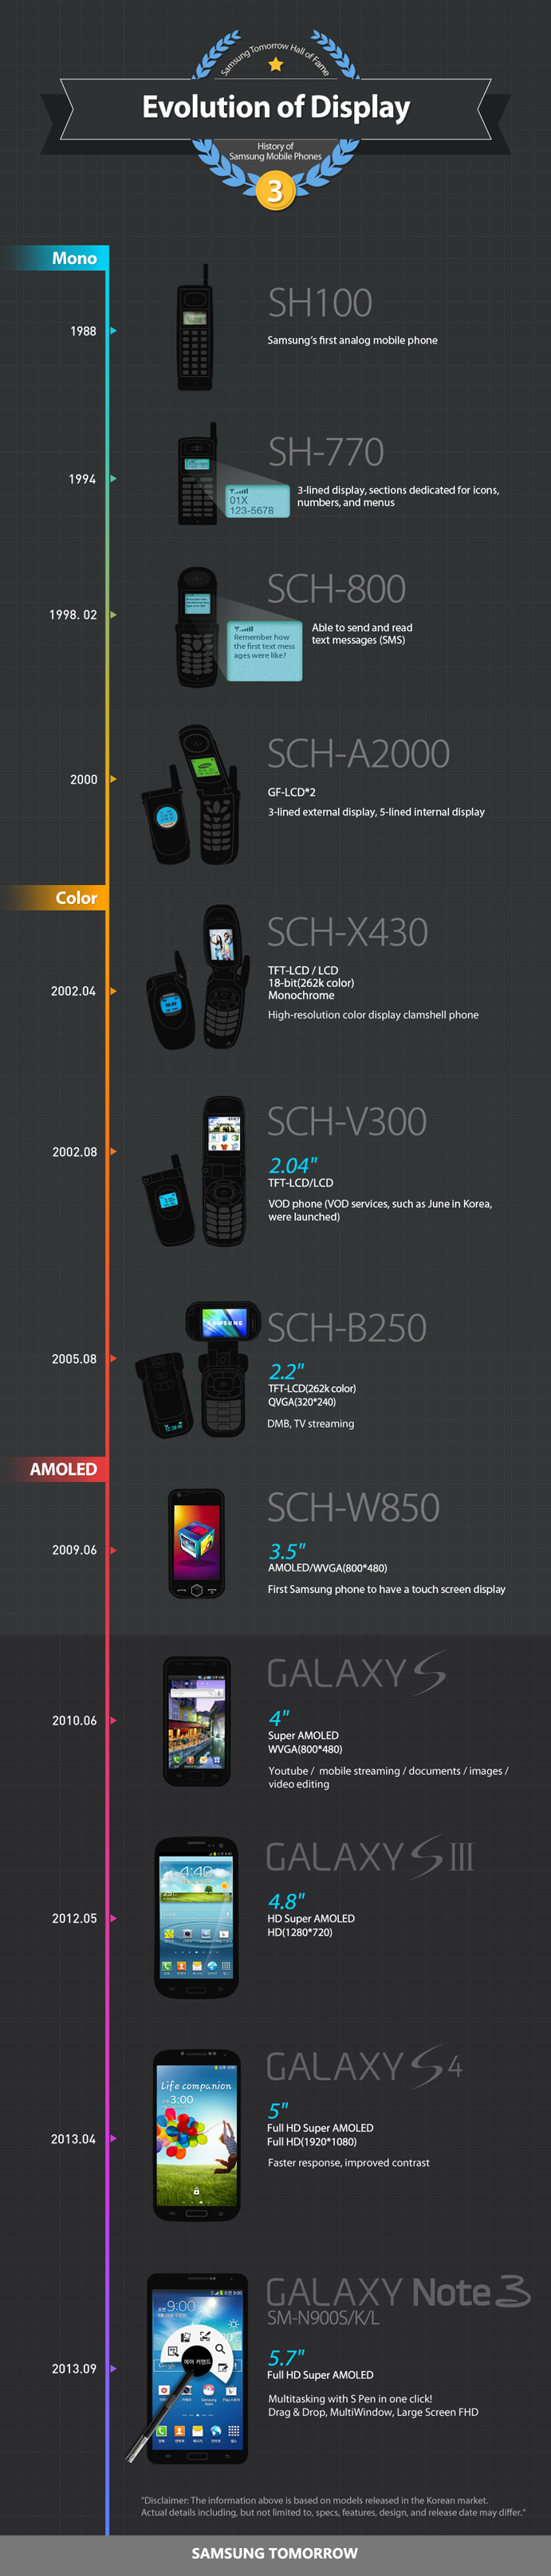 Infographic History of Samsung Mobile Phones Evolution of Display